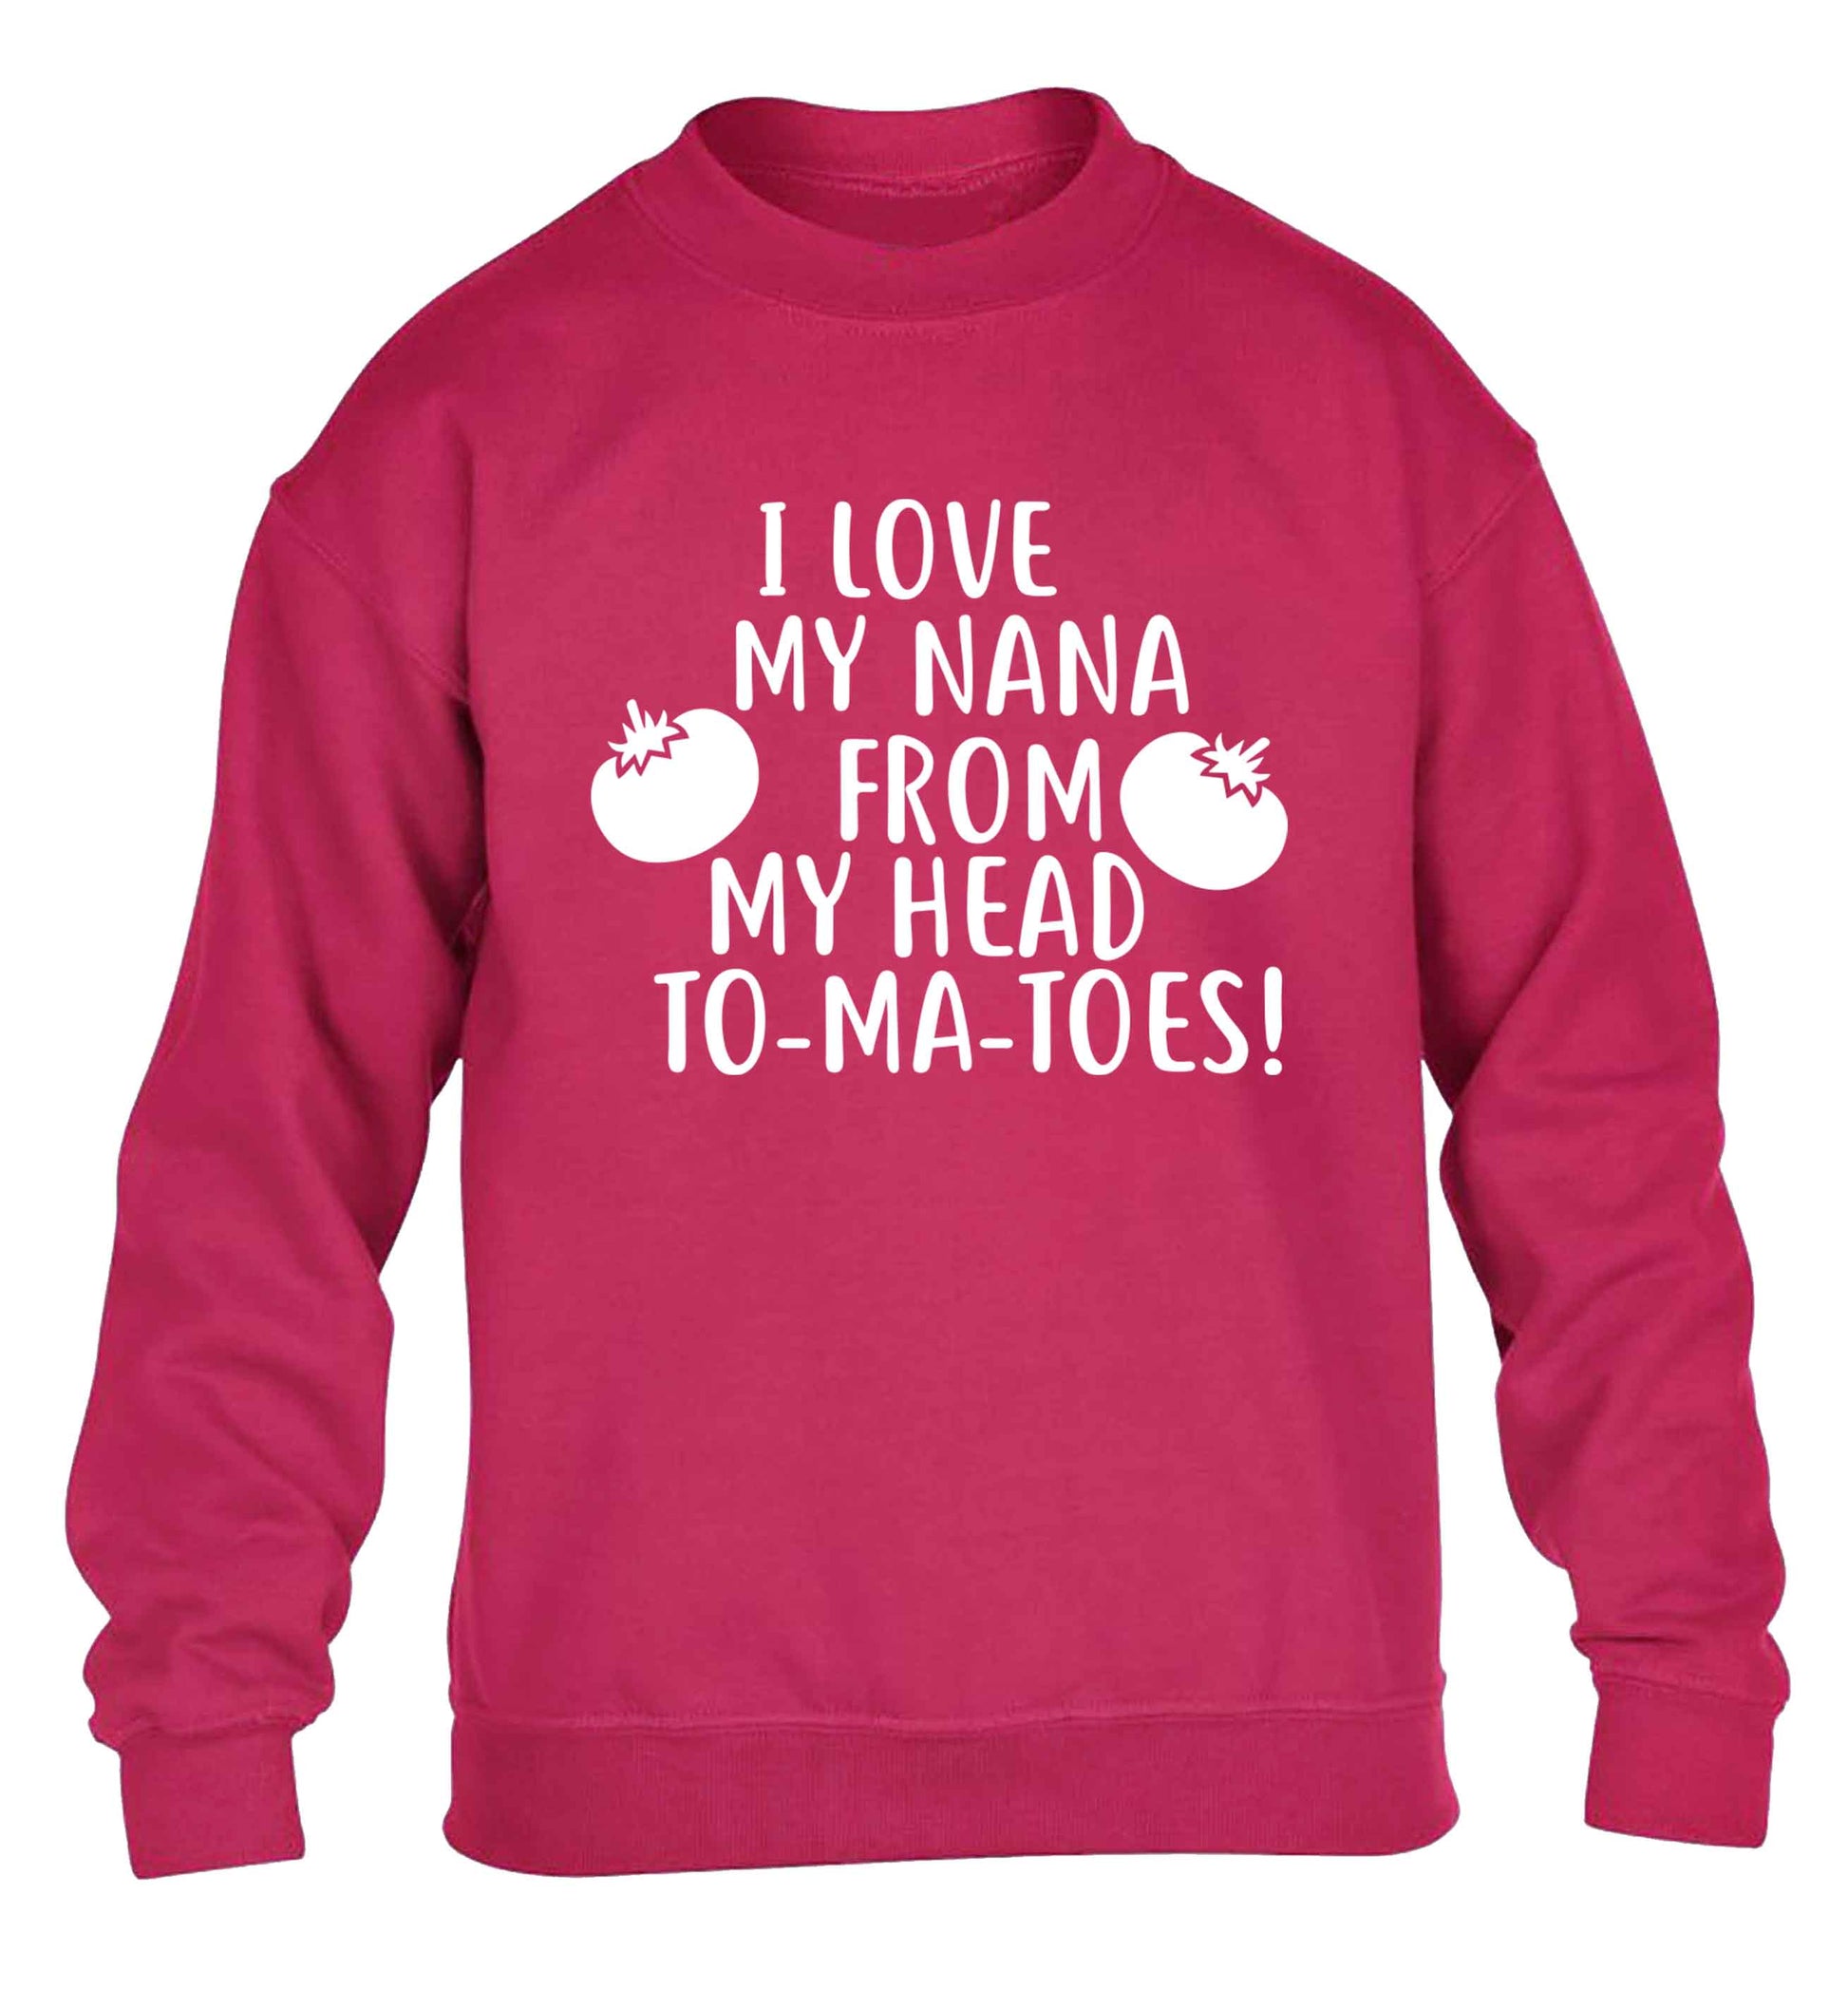 I love my nana from my head to-ma-toes children's pink sweater 12-13 Years